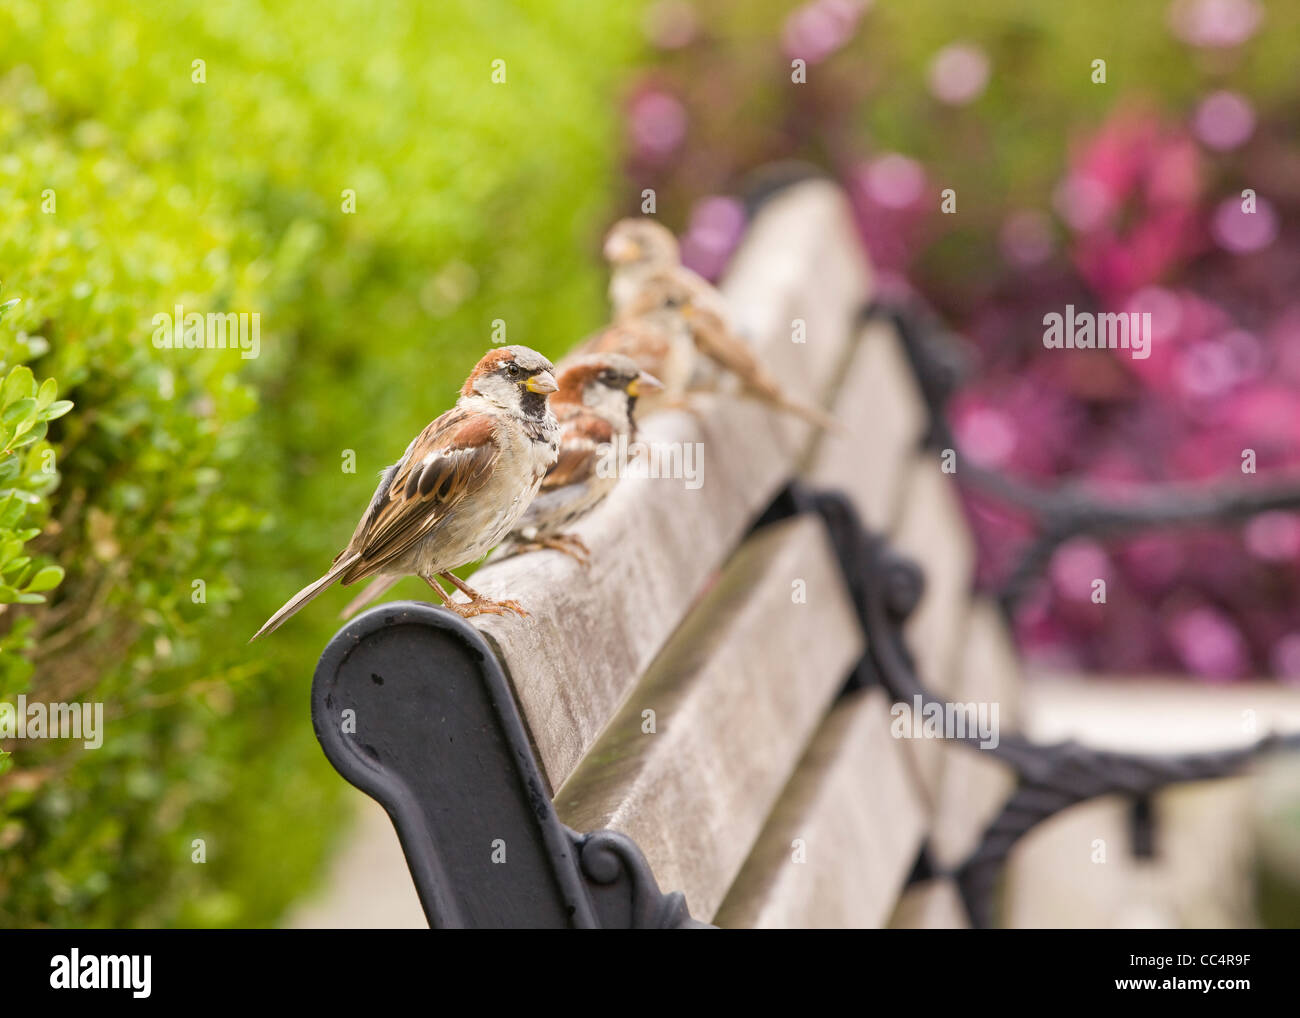 Common House sparrows resting on park bench Stock Photo